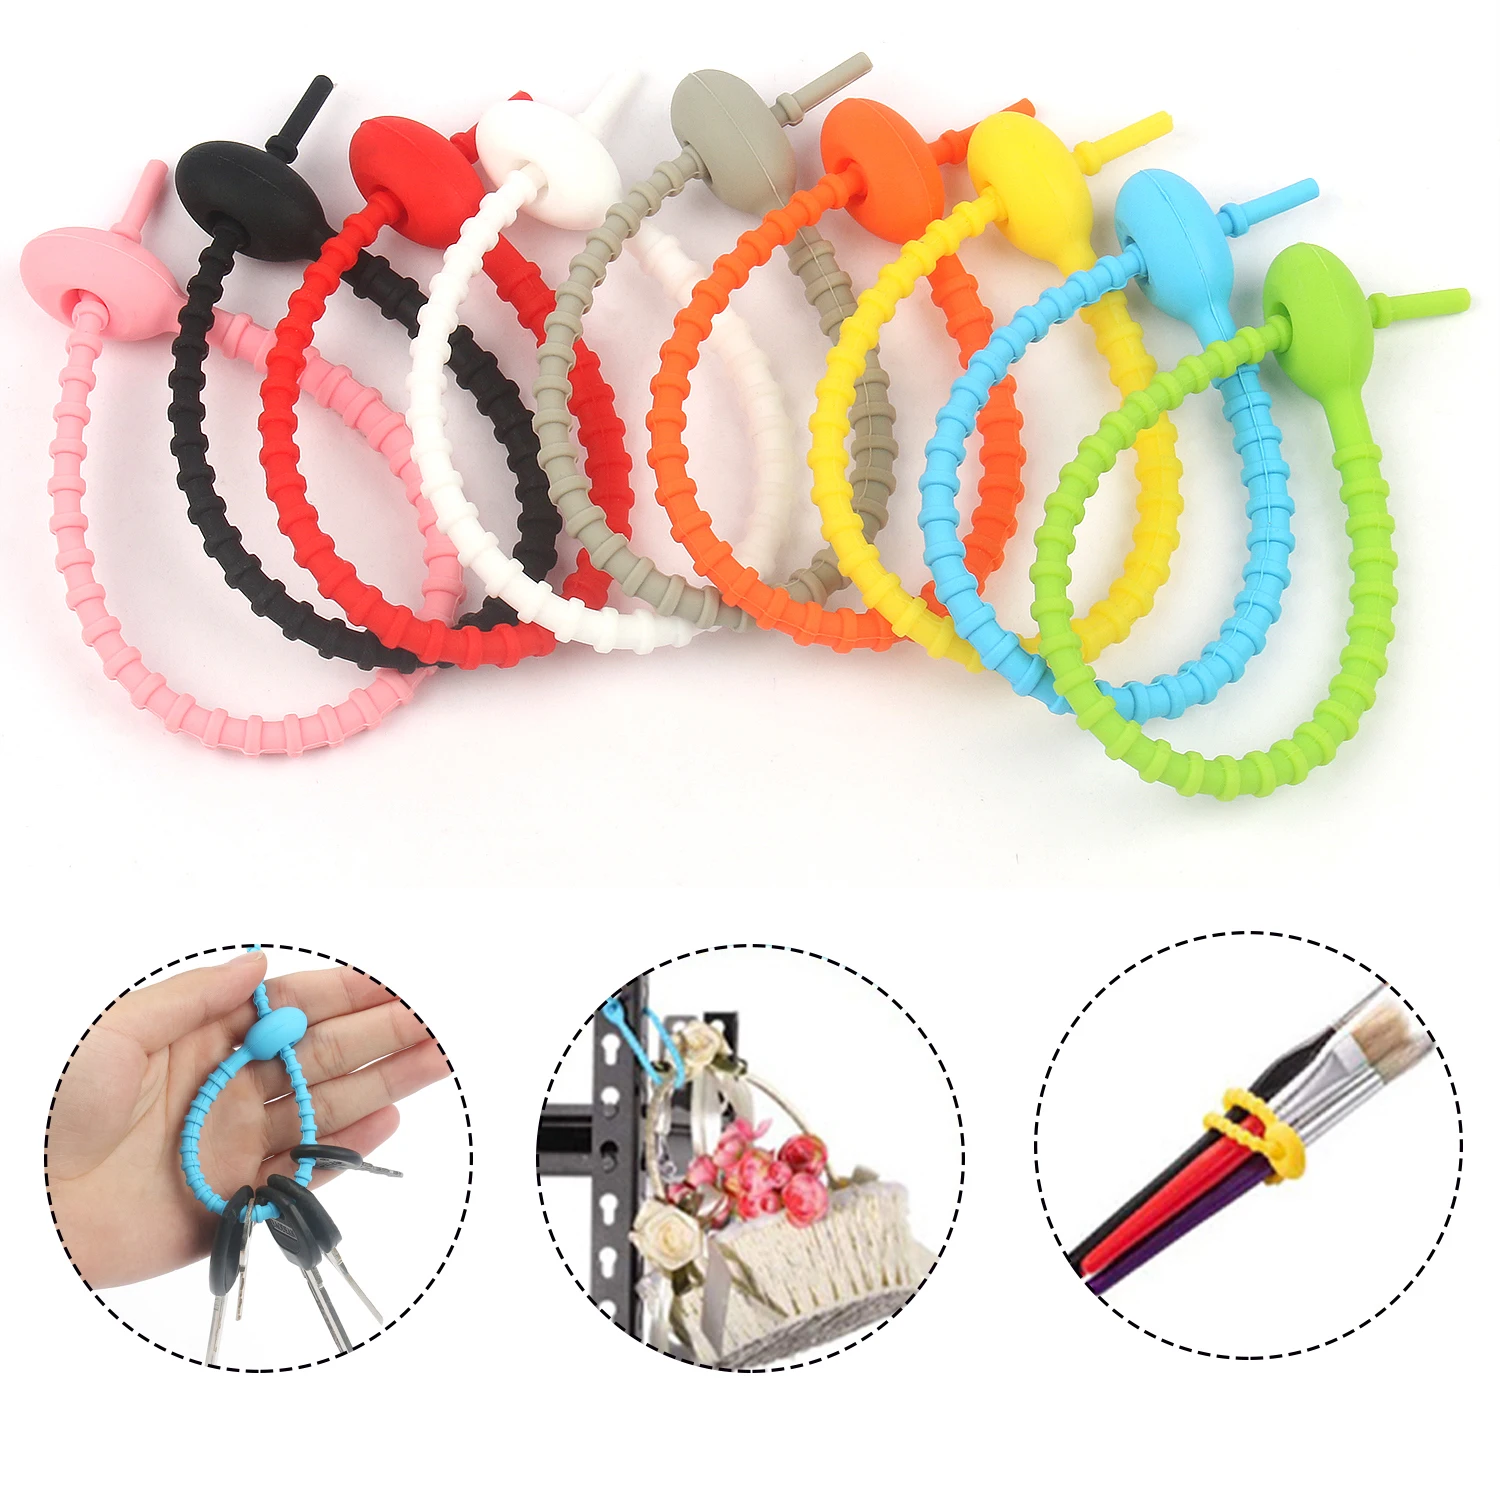 

10Pcs/lot Silicone Clasps Reusable Wire Cable Ties Multi-functional Craft Fasten Cable Bracelet Keychain Food Bag Bundle Tools